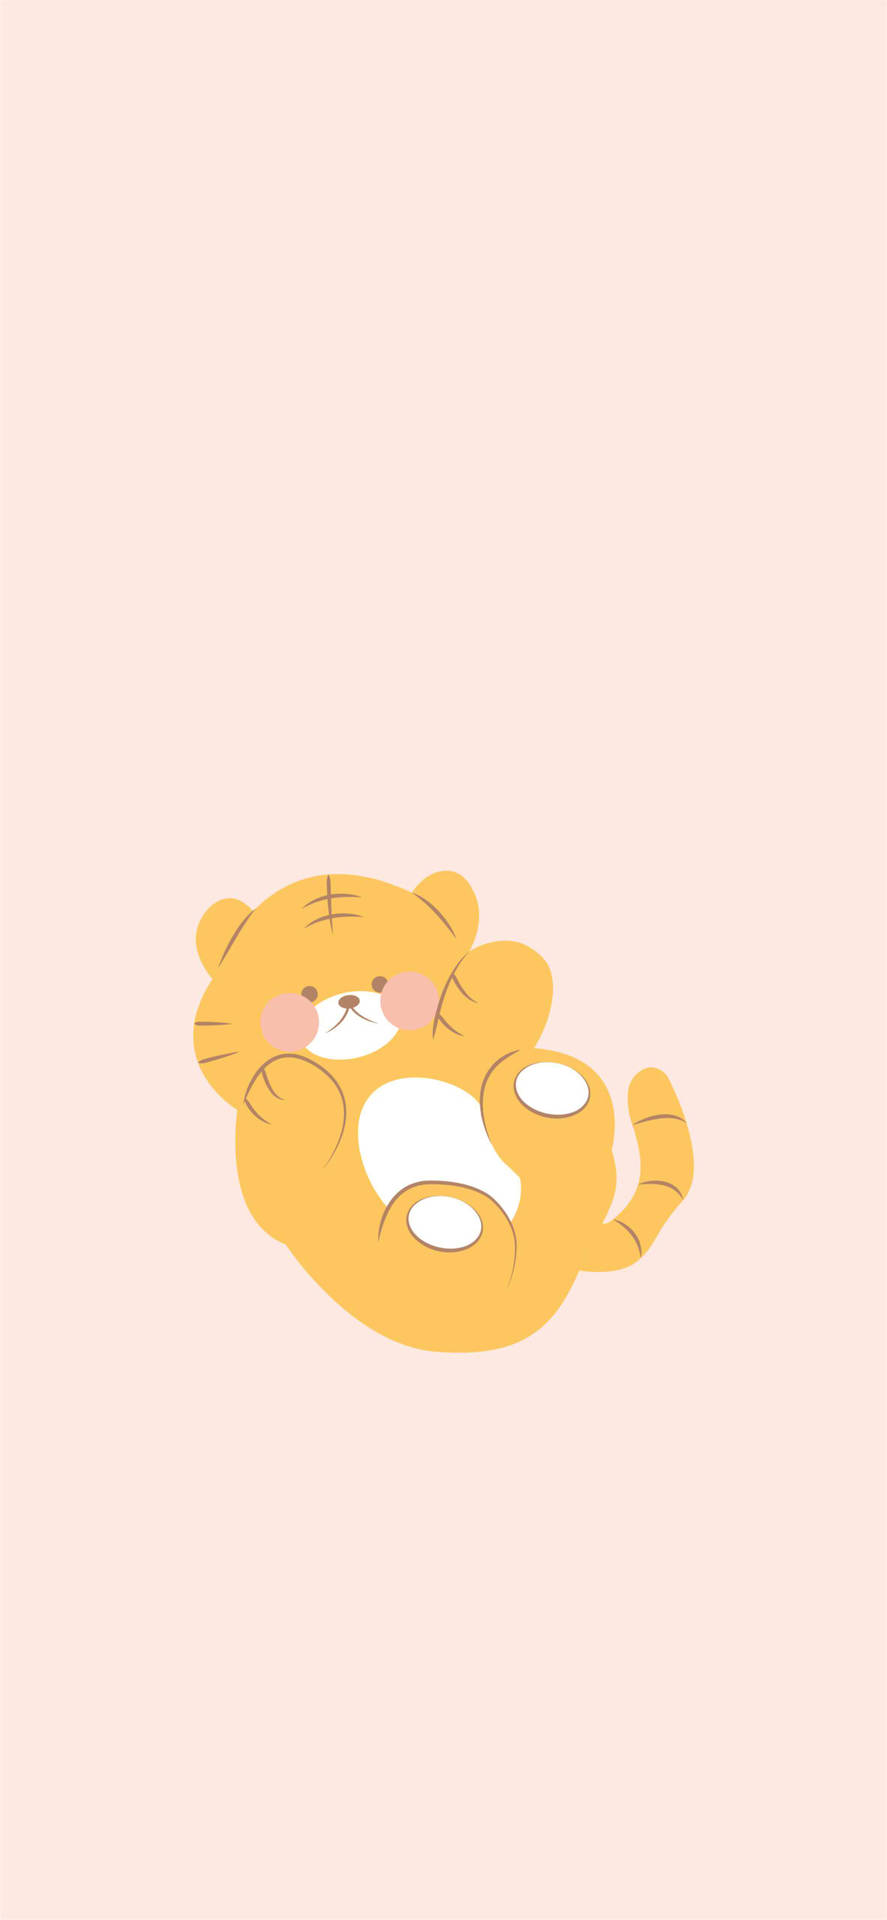 Cute Tiger Sticker Aesthetic Phone Background